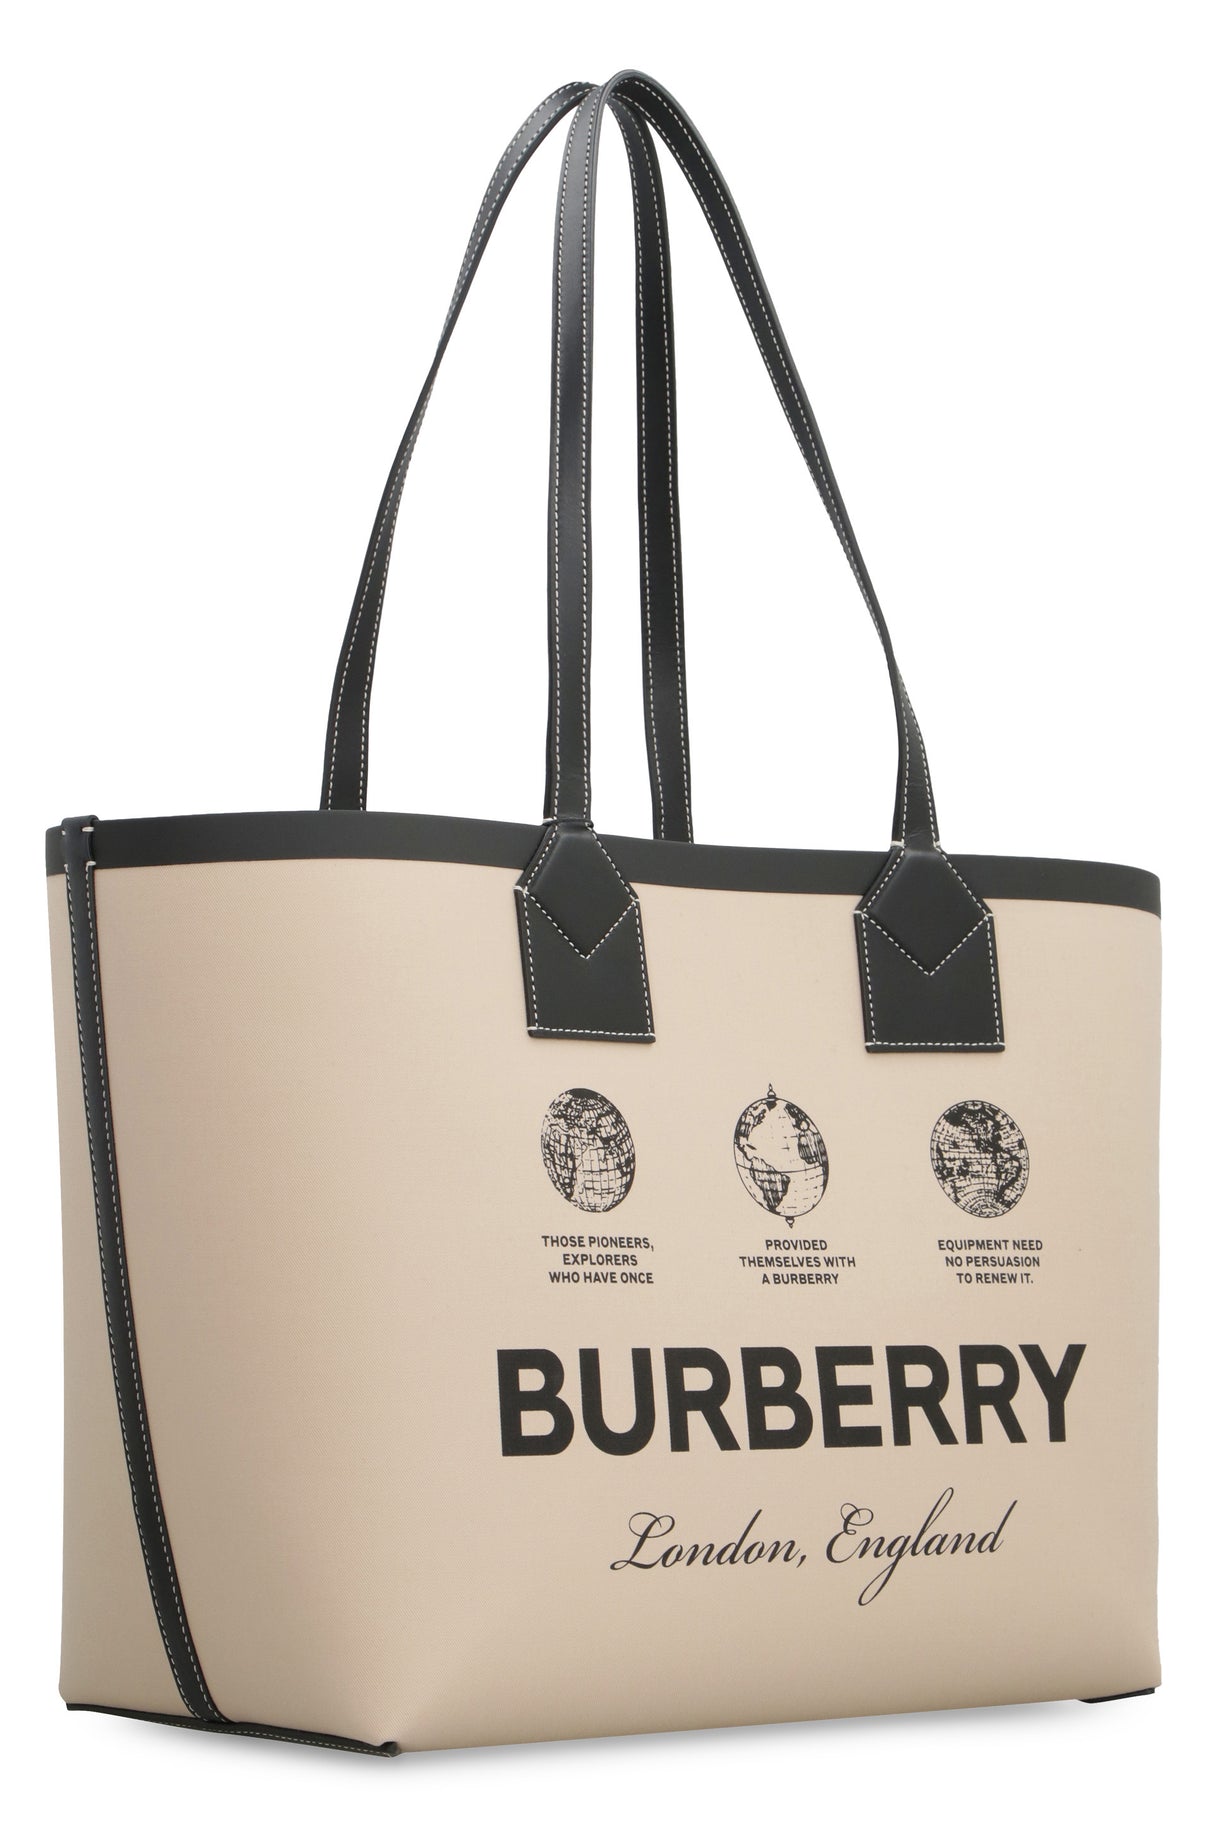 BURBERRY Canvas Tote Bag with Leather Details and Check Lining